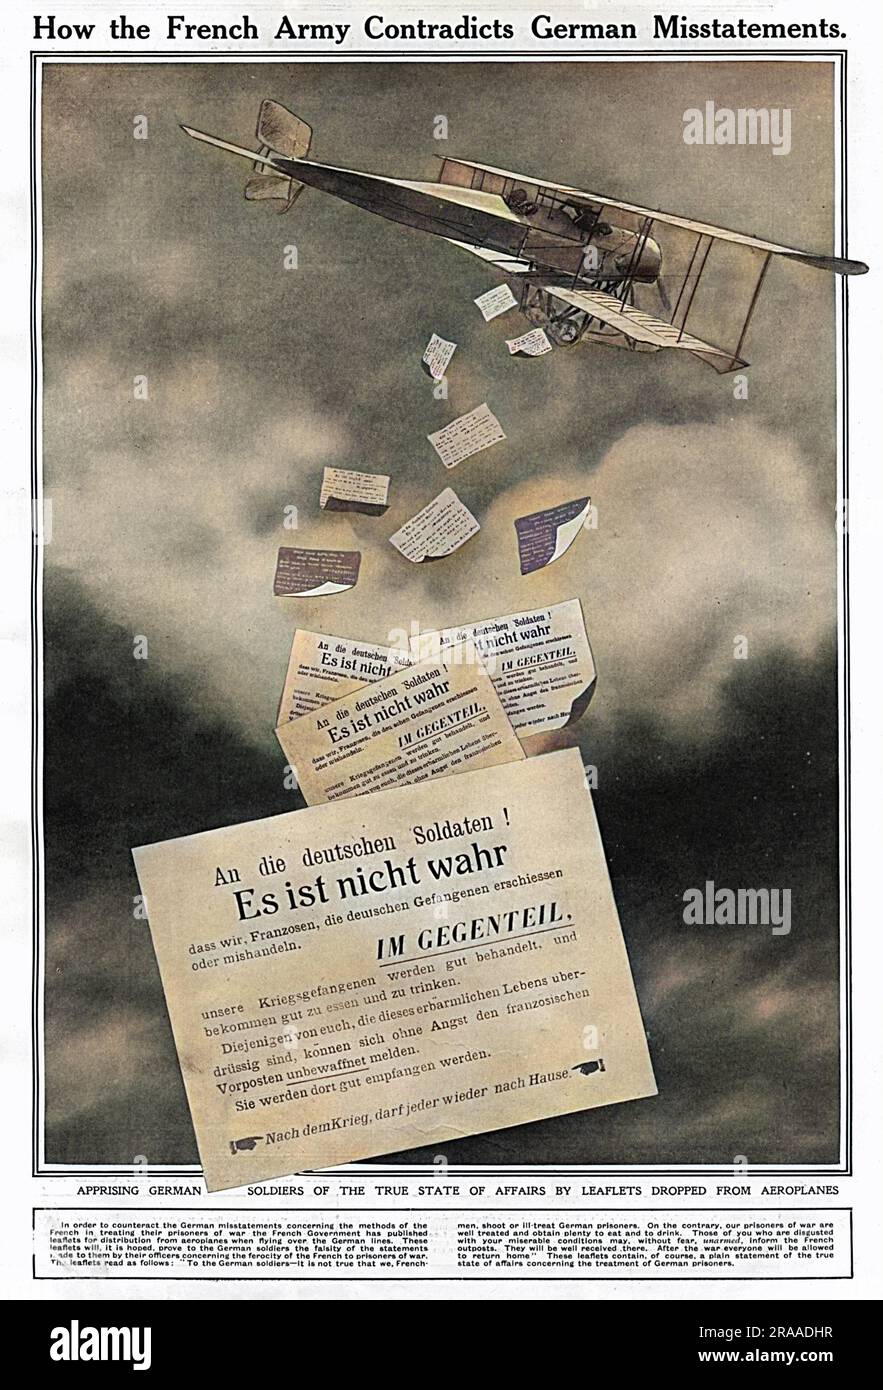 How the French army contradicts German misstatements. A French biplane drops leaflets over German land hoping to prove to the German soldiers the falsity of the statements made to them by their officers concerning the ferocity of the French to prisoners of war: To the German soldiers - it is not true that we, Frenchmen, shoot of ill-treat German prisoners ... The leaflets also exhort Germans to give themselves up as they will be well-received and be allowed to return home after the war.     Date: 1914 Stock Photo